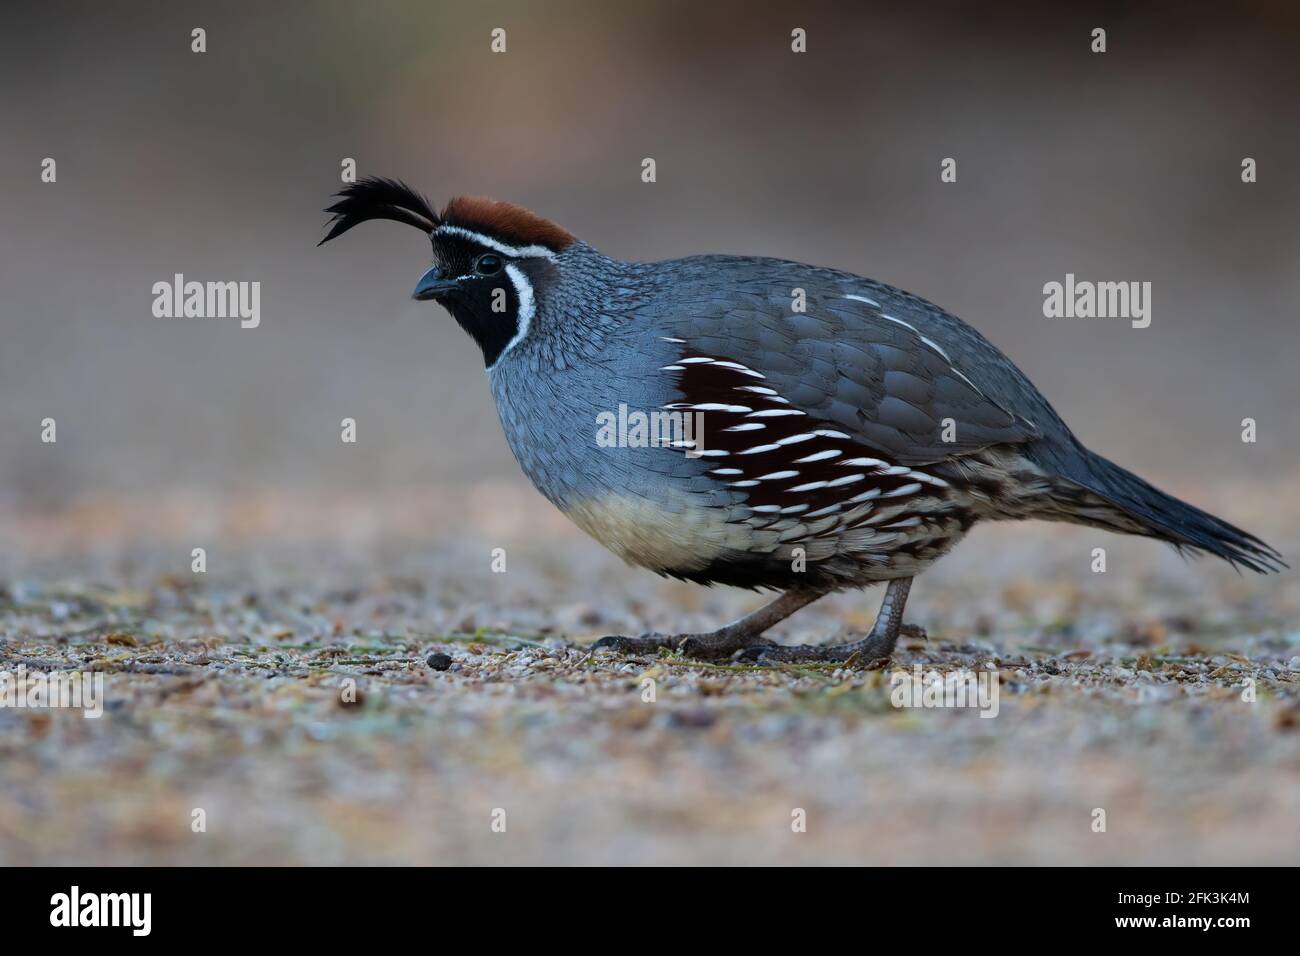 Gambel's Quail (Callipepla gambelii) adult perched on the ground Stock Photo